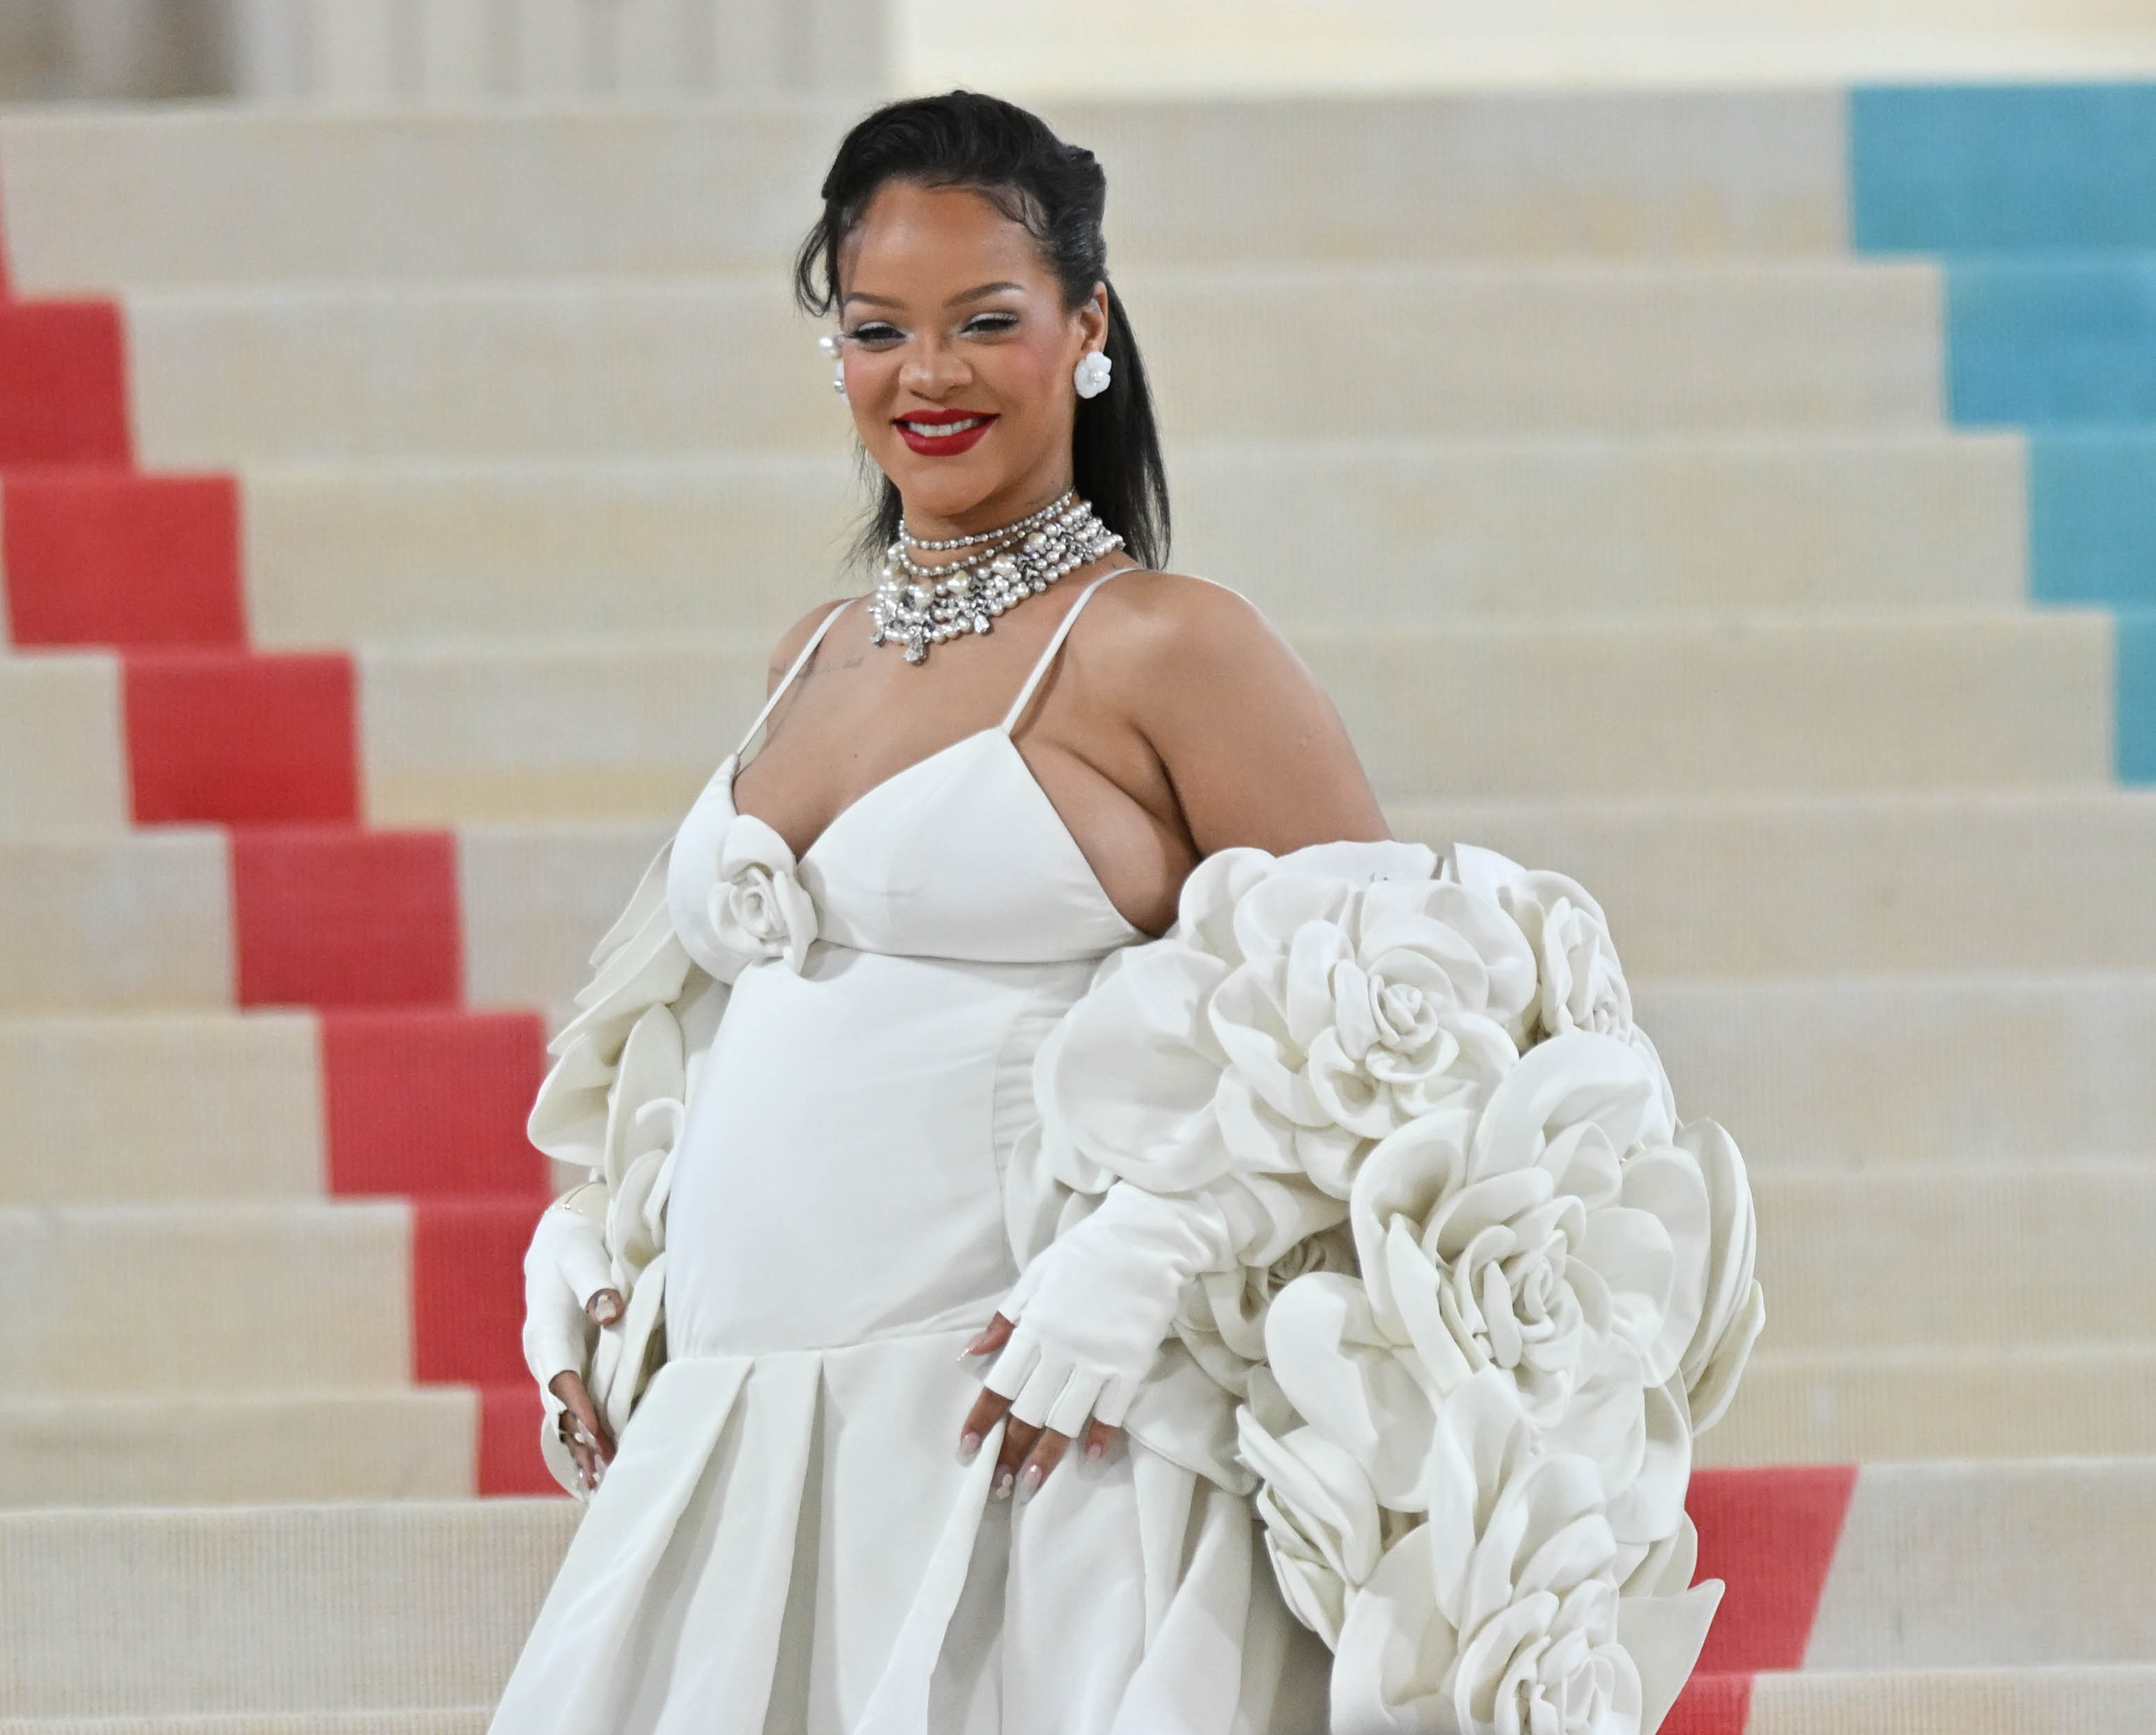 Rihanna at the 2023 Met Gala on May 1, 2023 in New York City. | Source: Getty Images